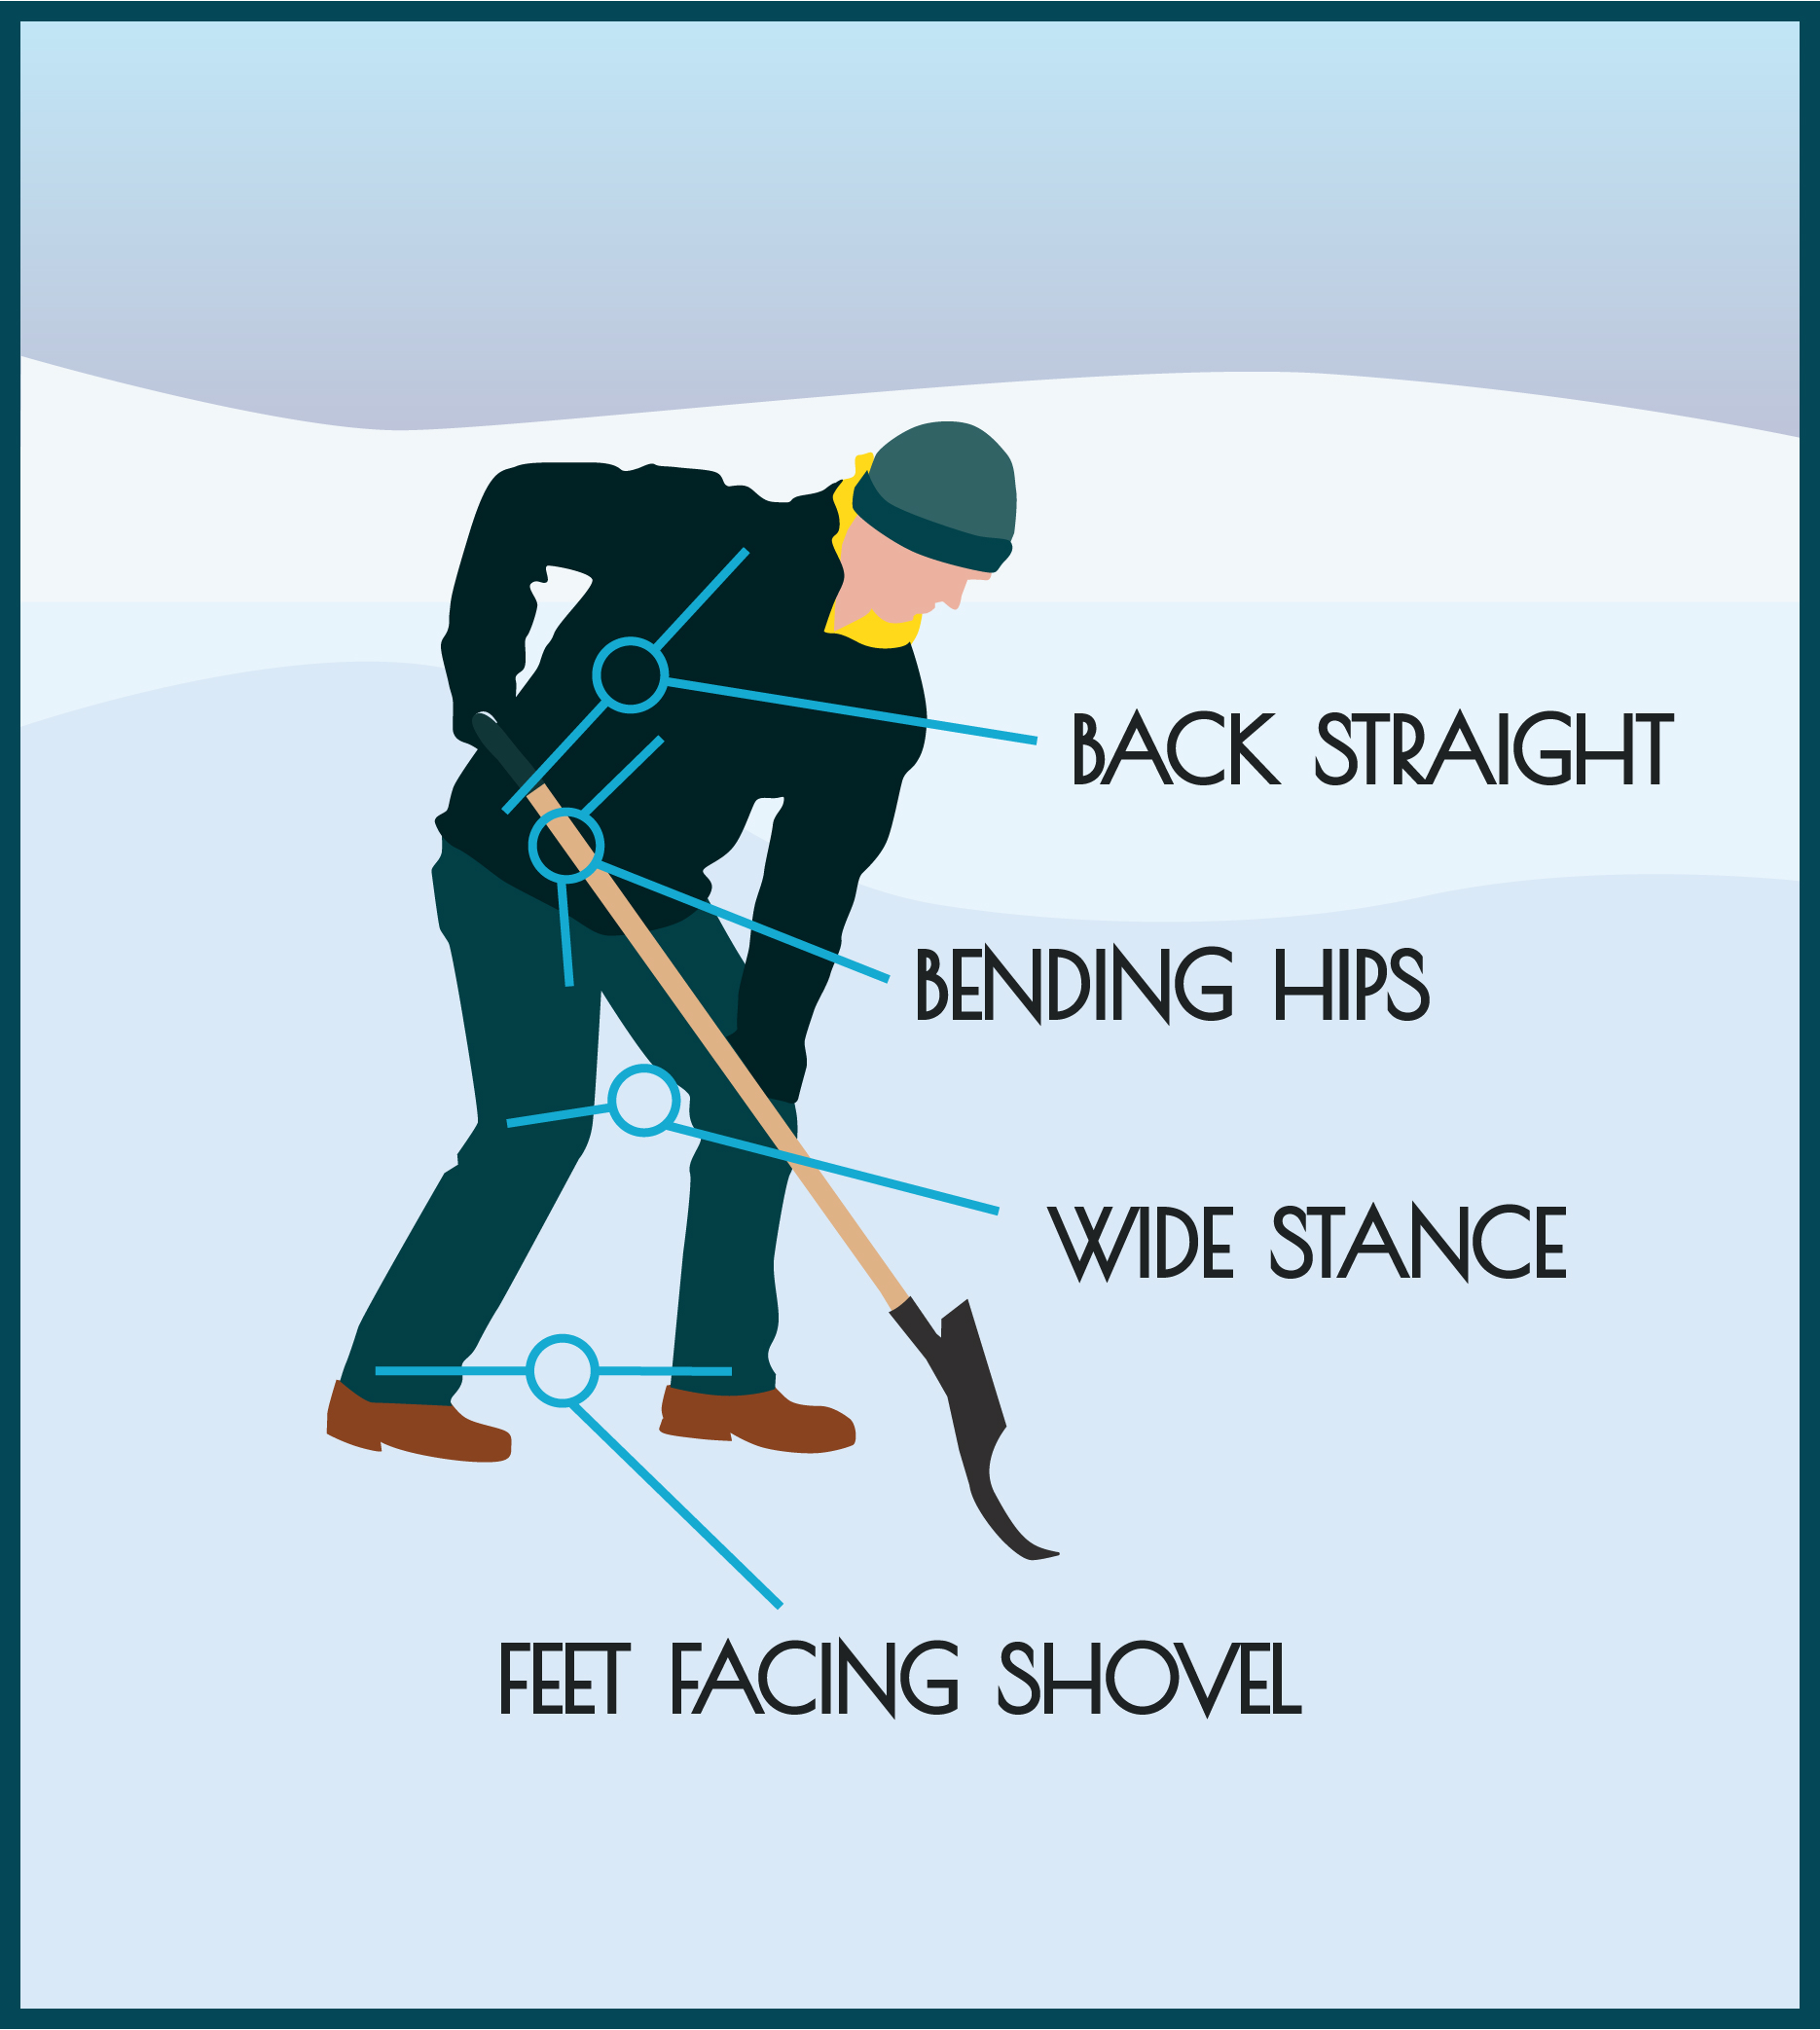 Cleaning Snow Safely &amp; Properly